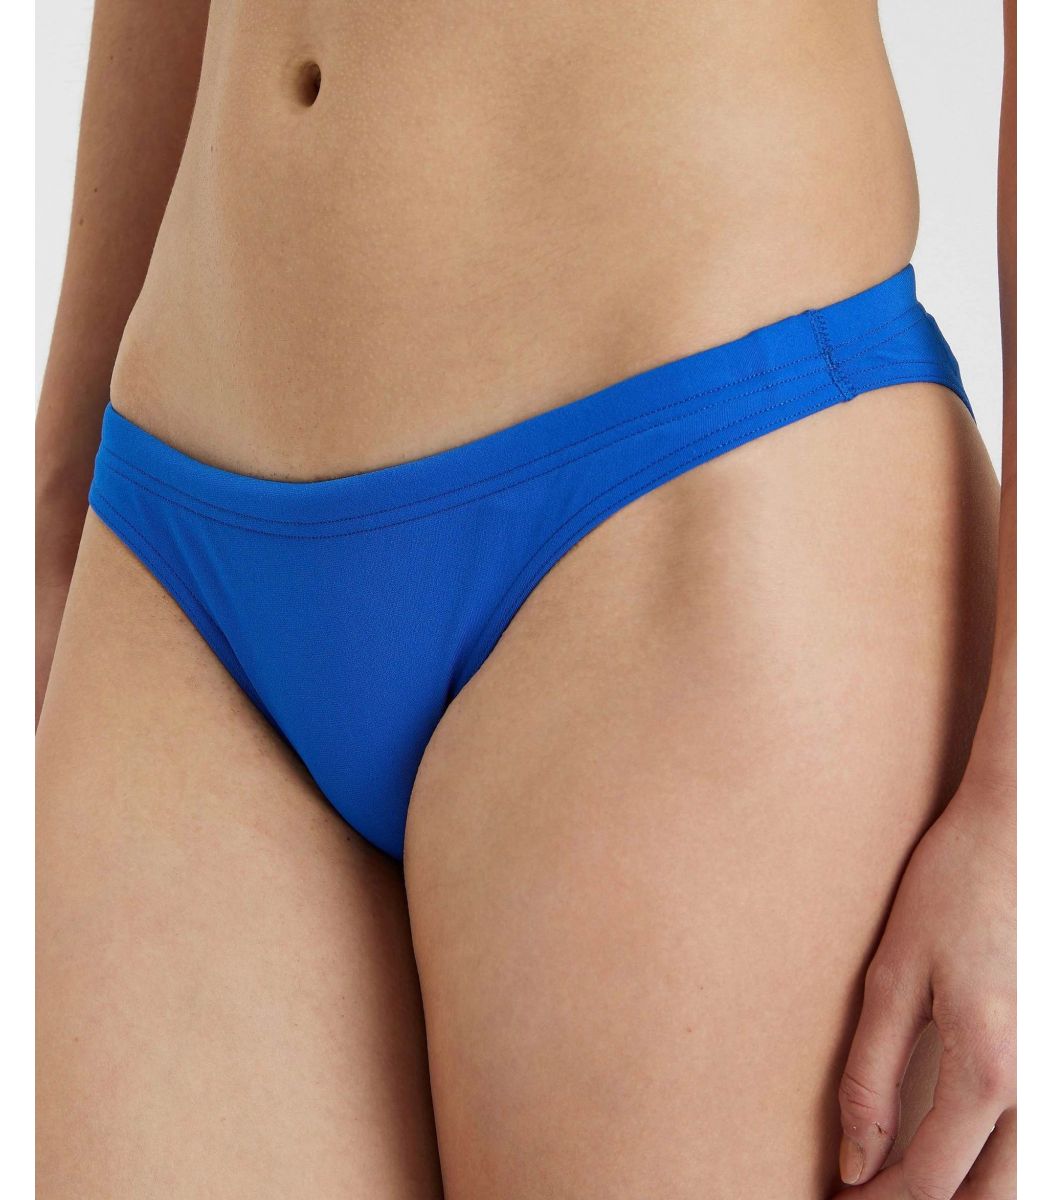  Woman Arena Arena women solid bottom brief 2A245-85-3